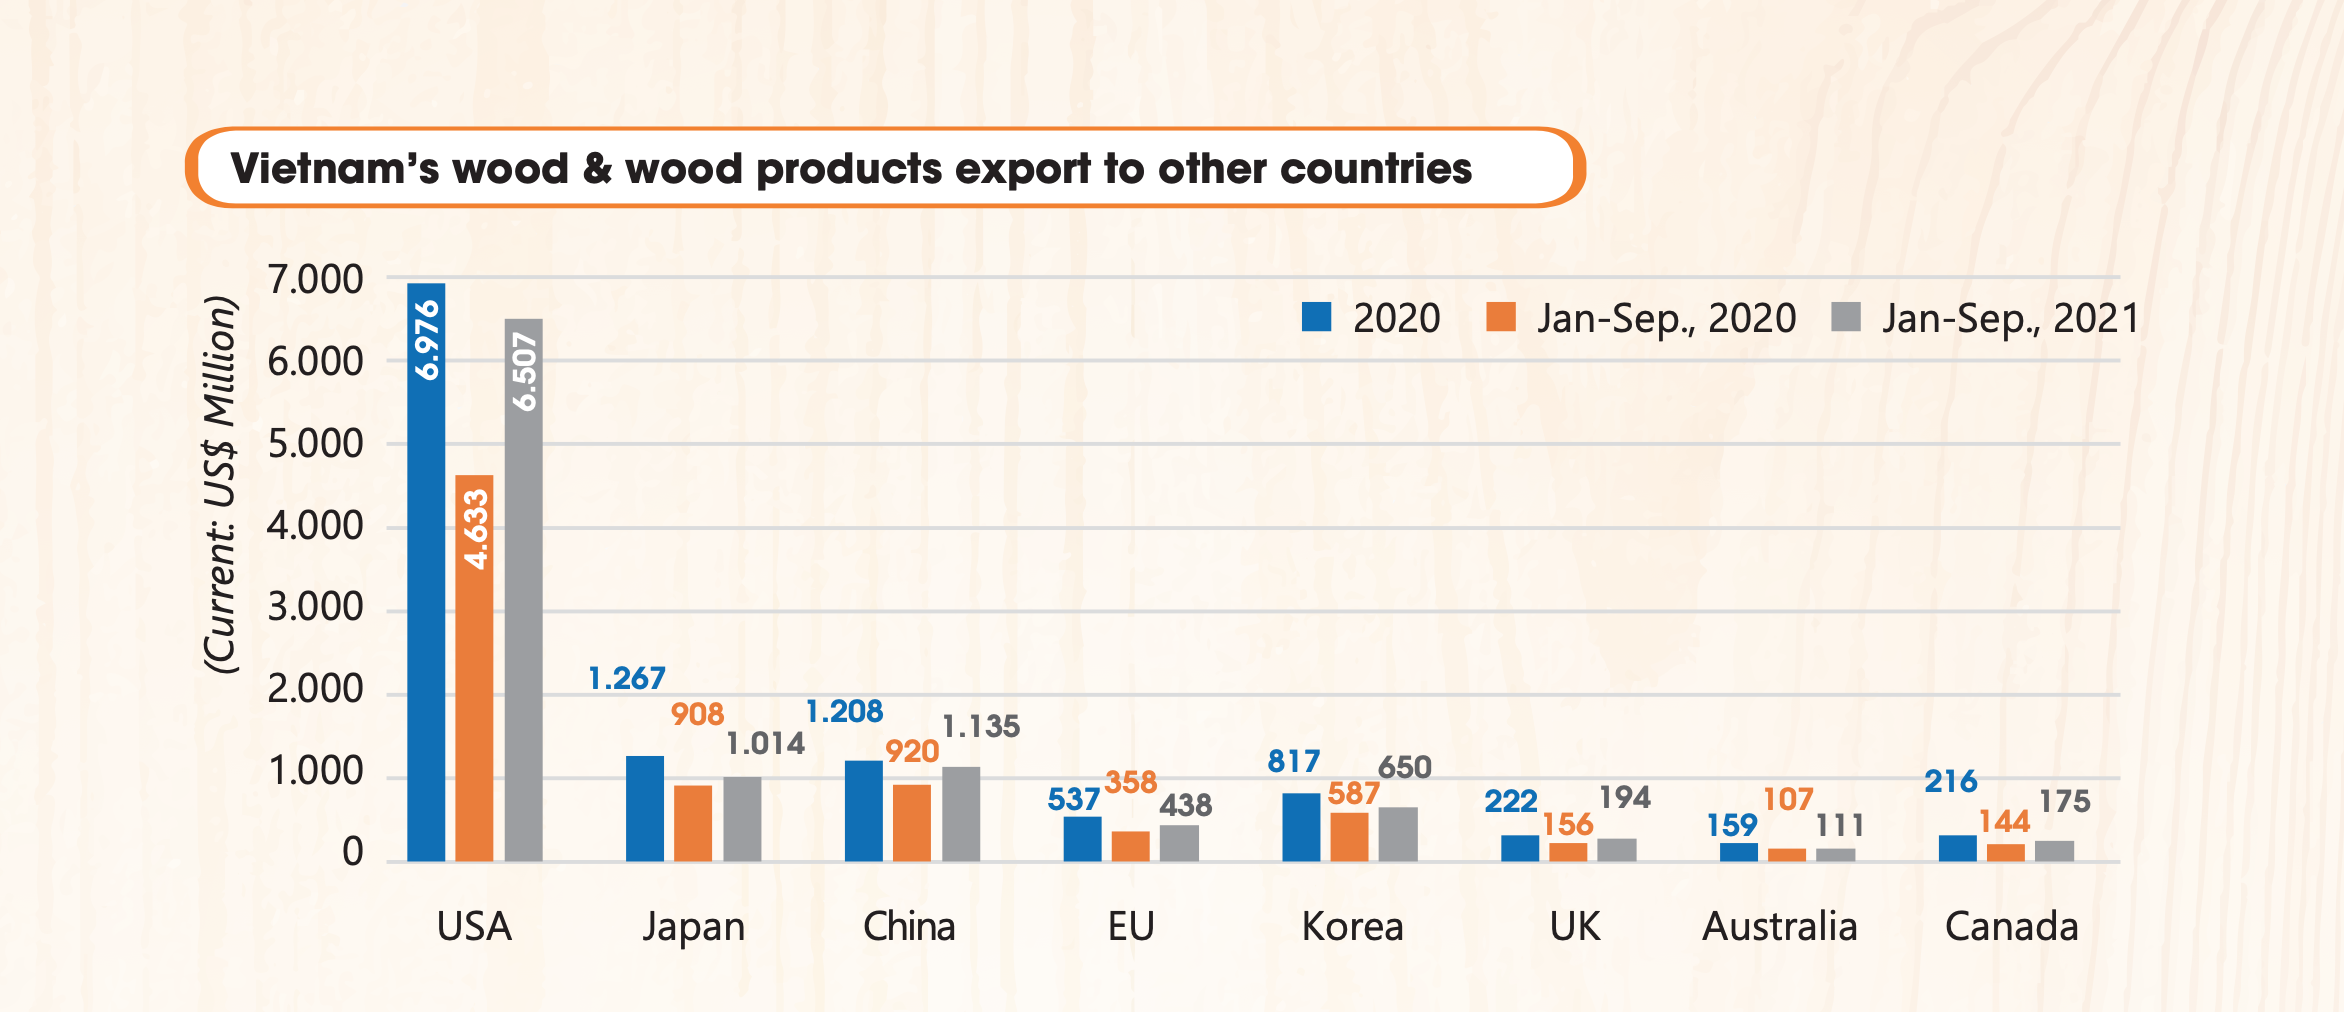 Vietnam wood and wood product exports from Jan - Sep, 2021